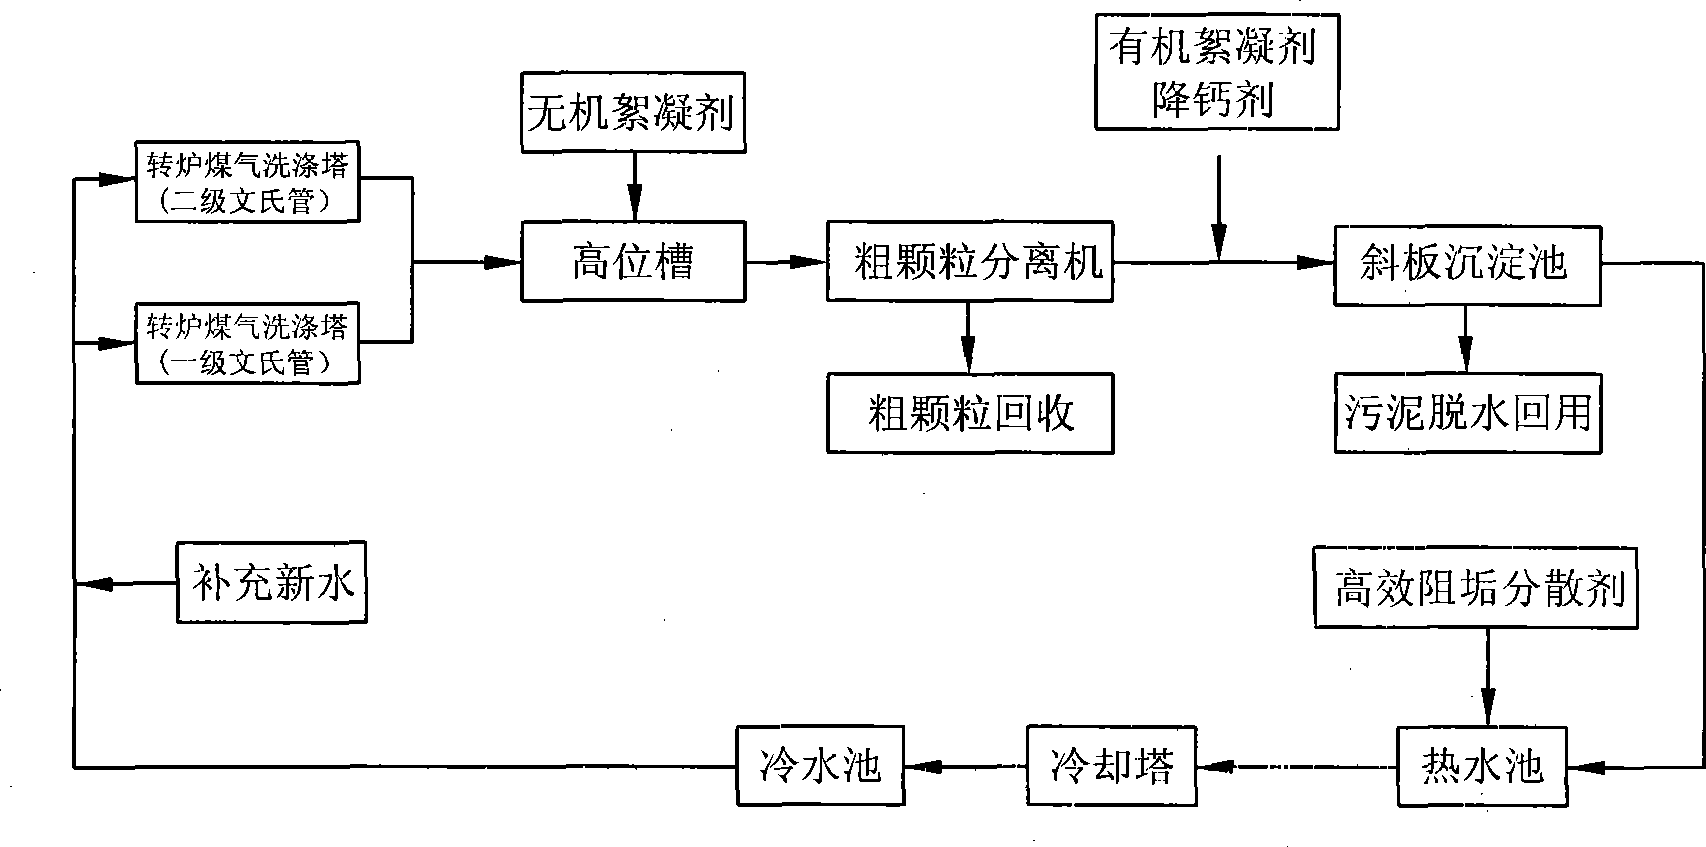 Process for treating revolving furnace flue gas dedusting water from steel mill by low hardness method